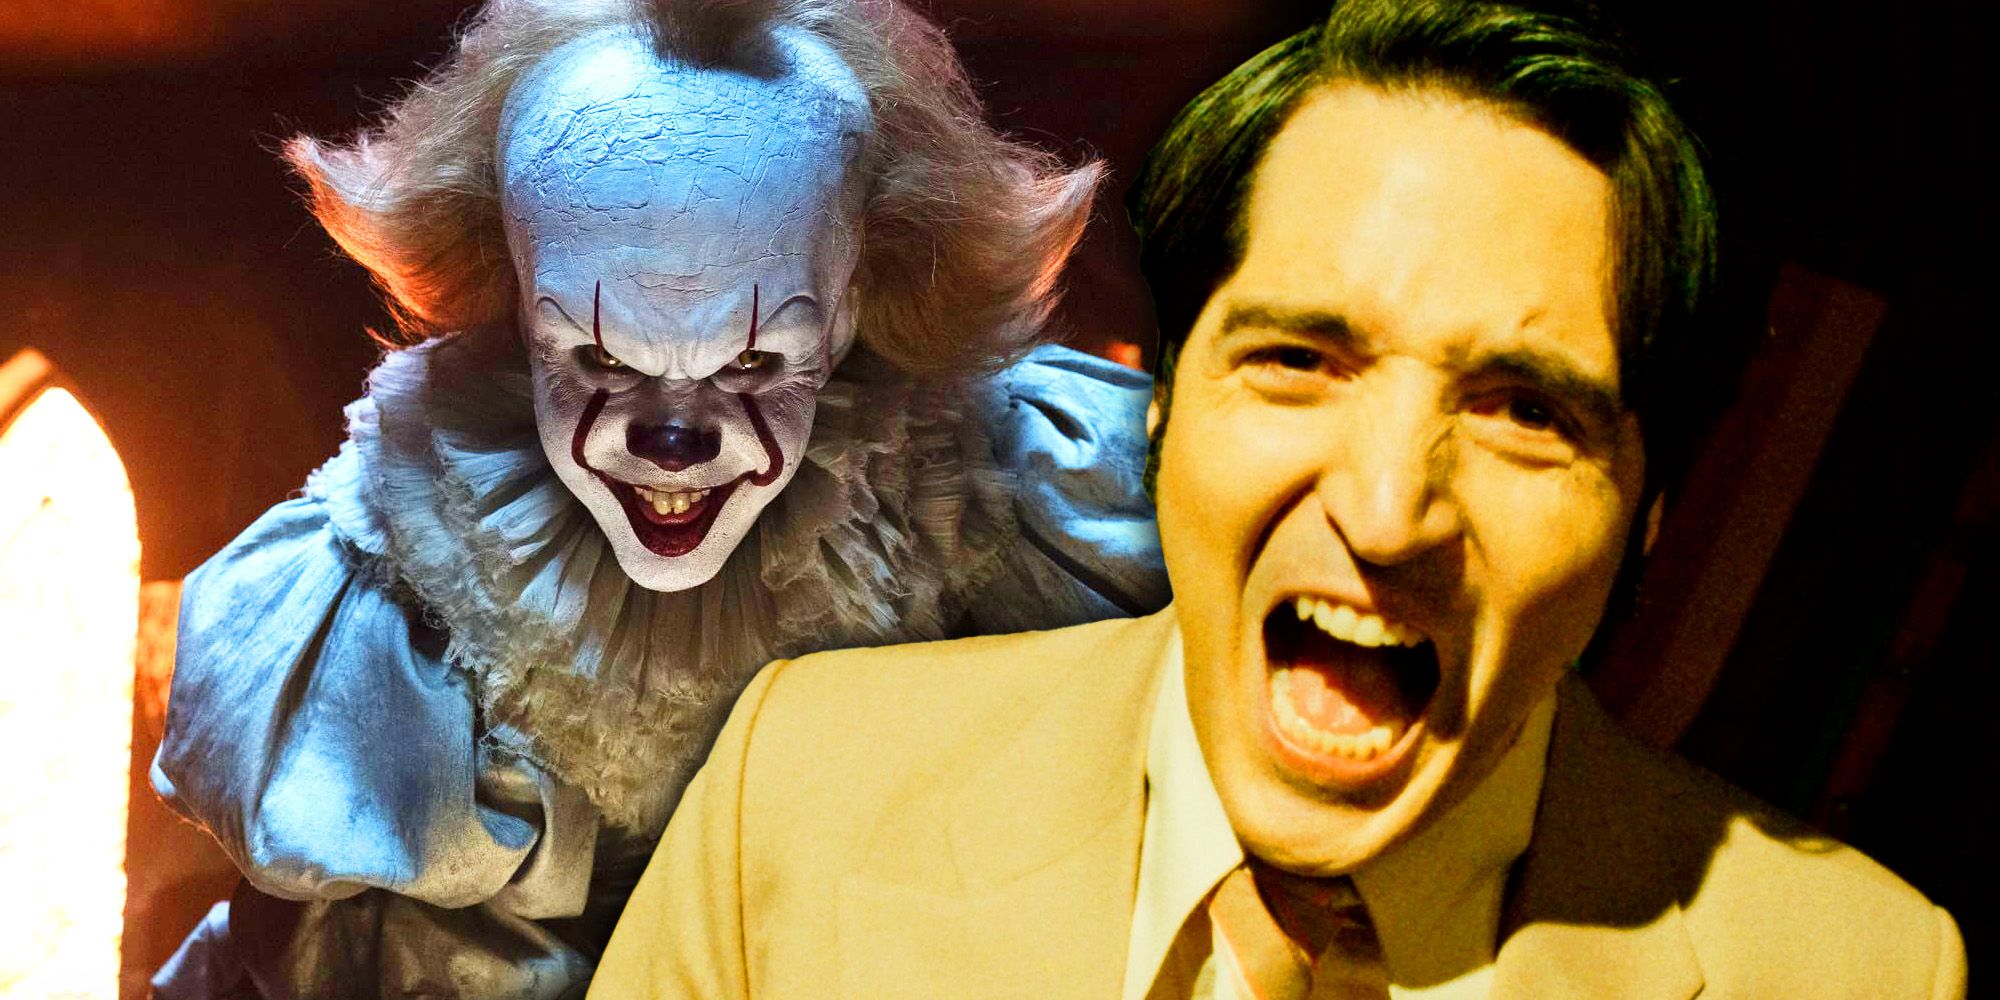 A custom image of Pennywise from It and David Dastmalchian as Jack Delroy in Late Night with the Devil